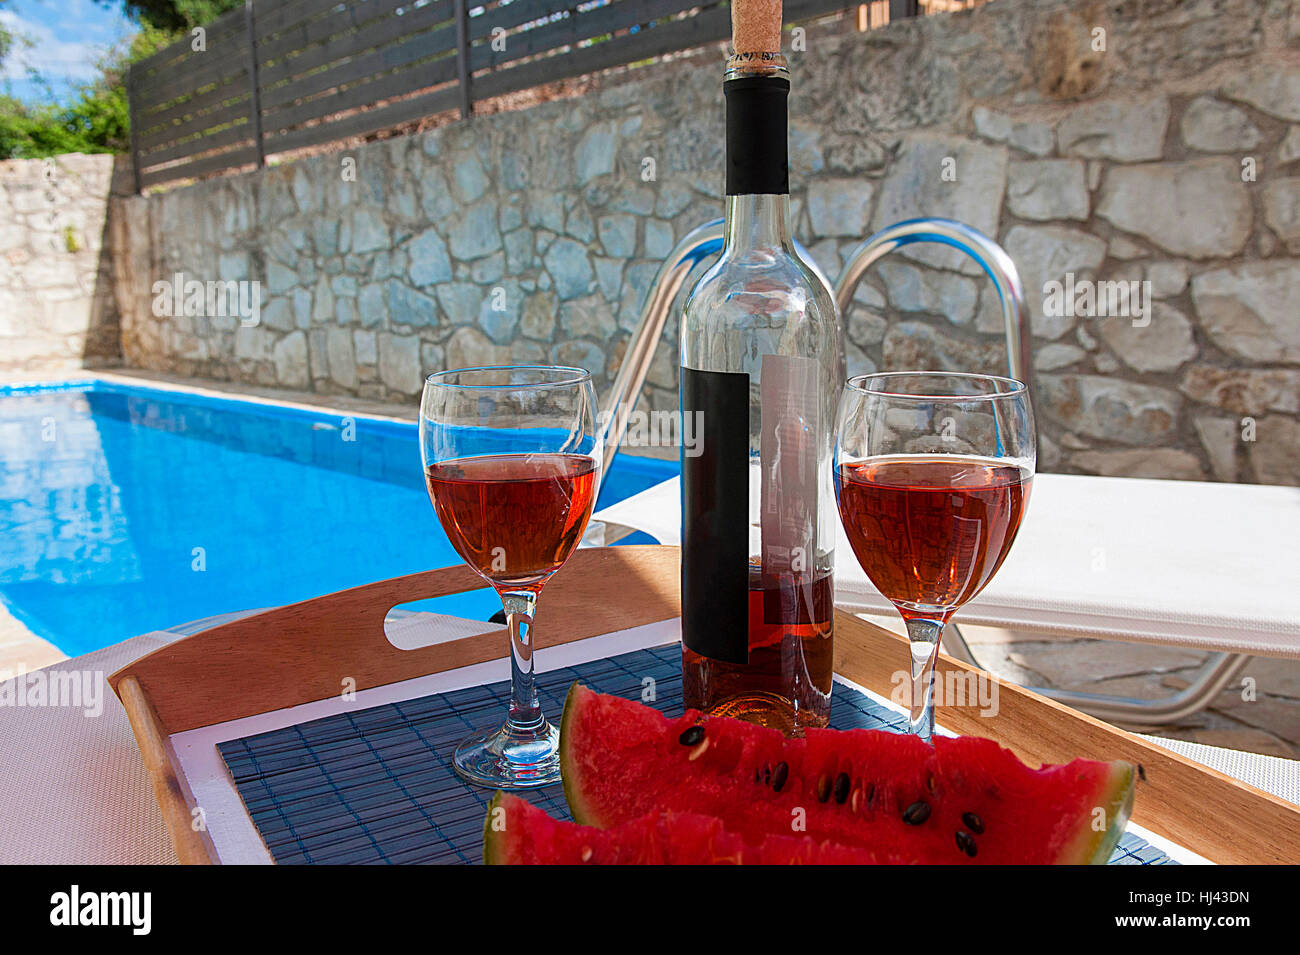 2 glasses and bottle of wine at poolside, romance Stock Photo